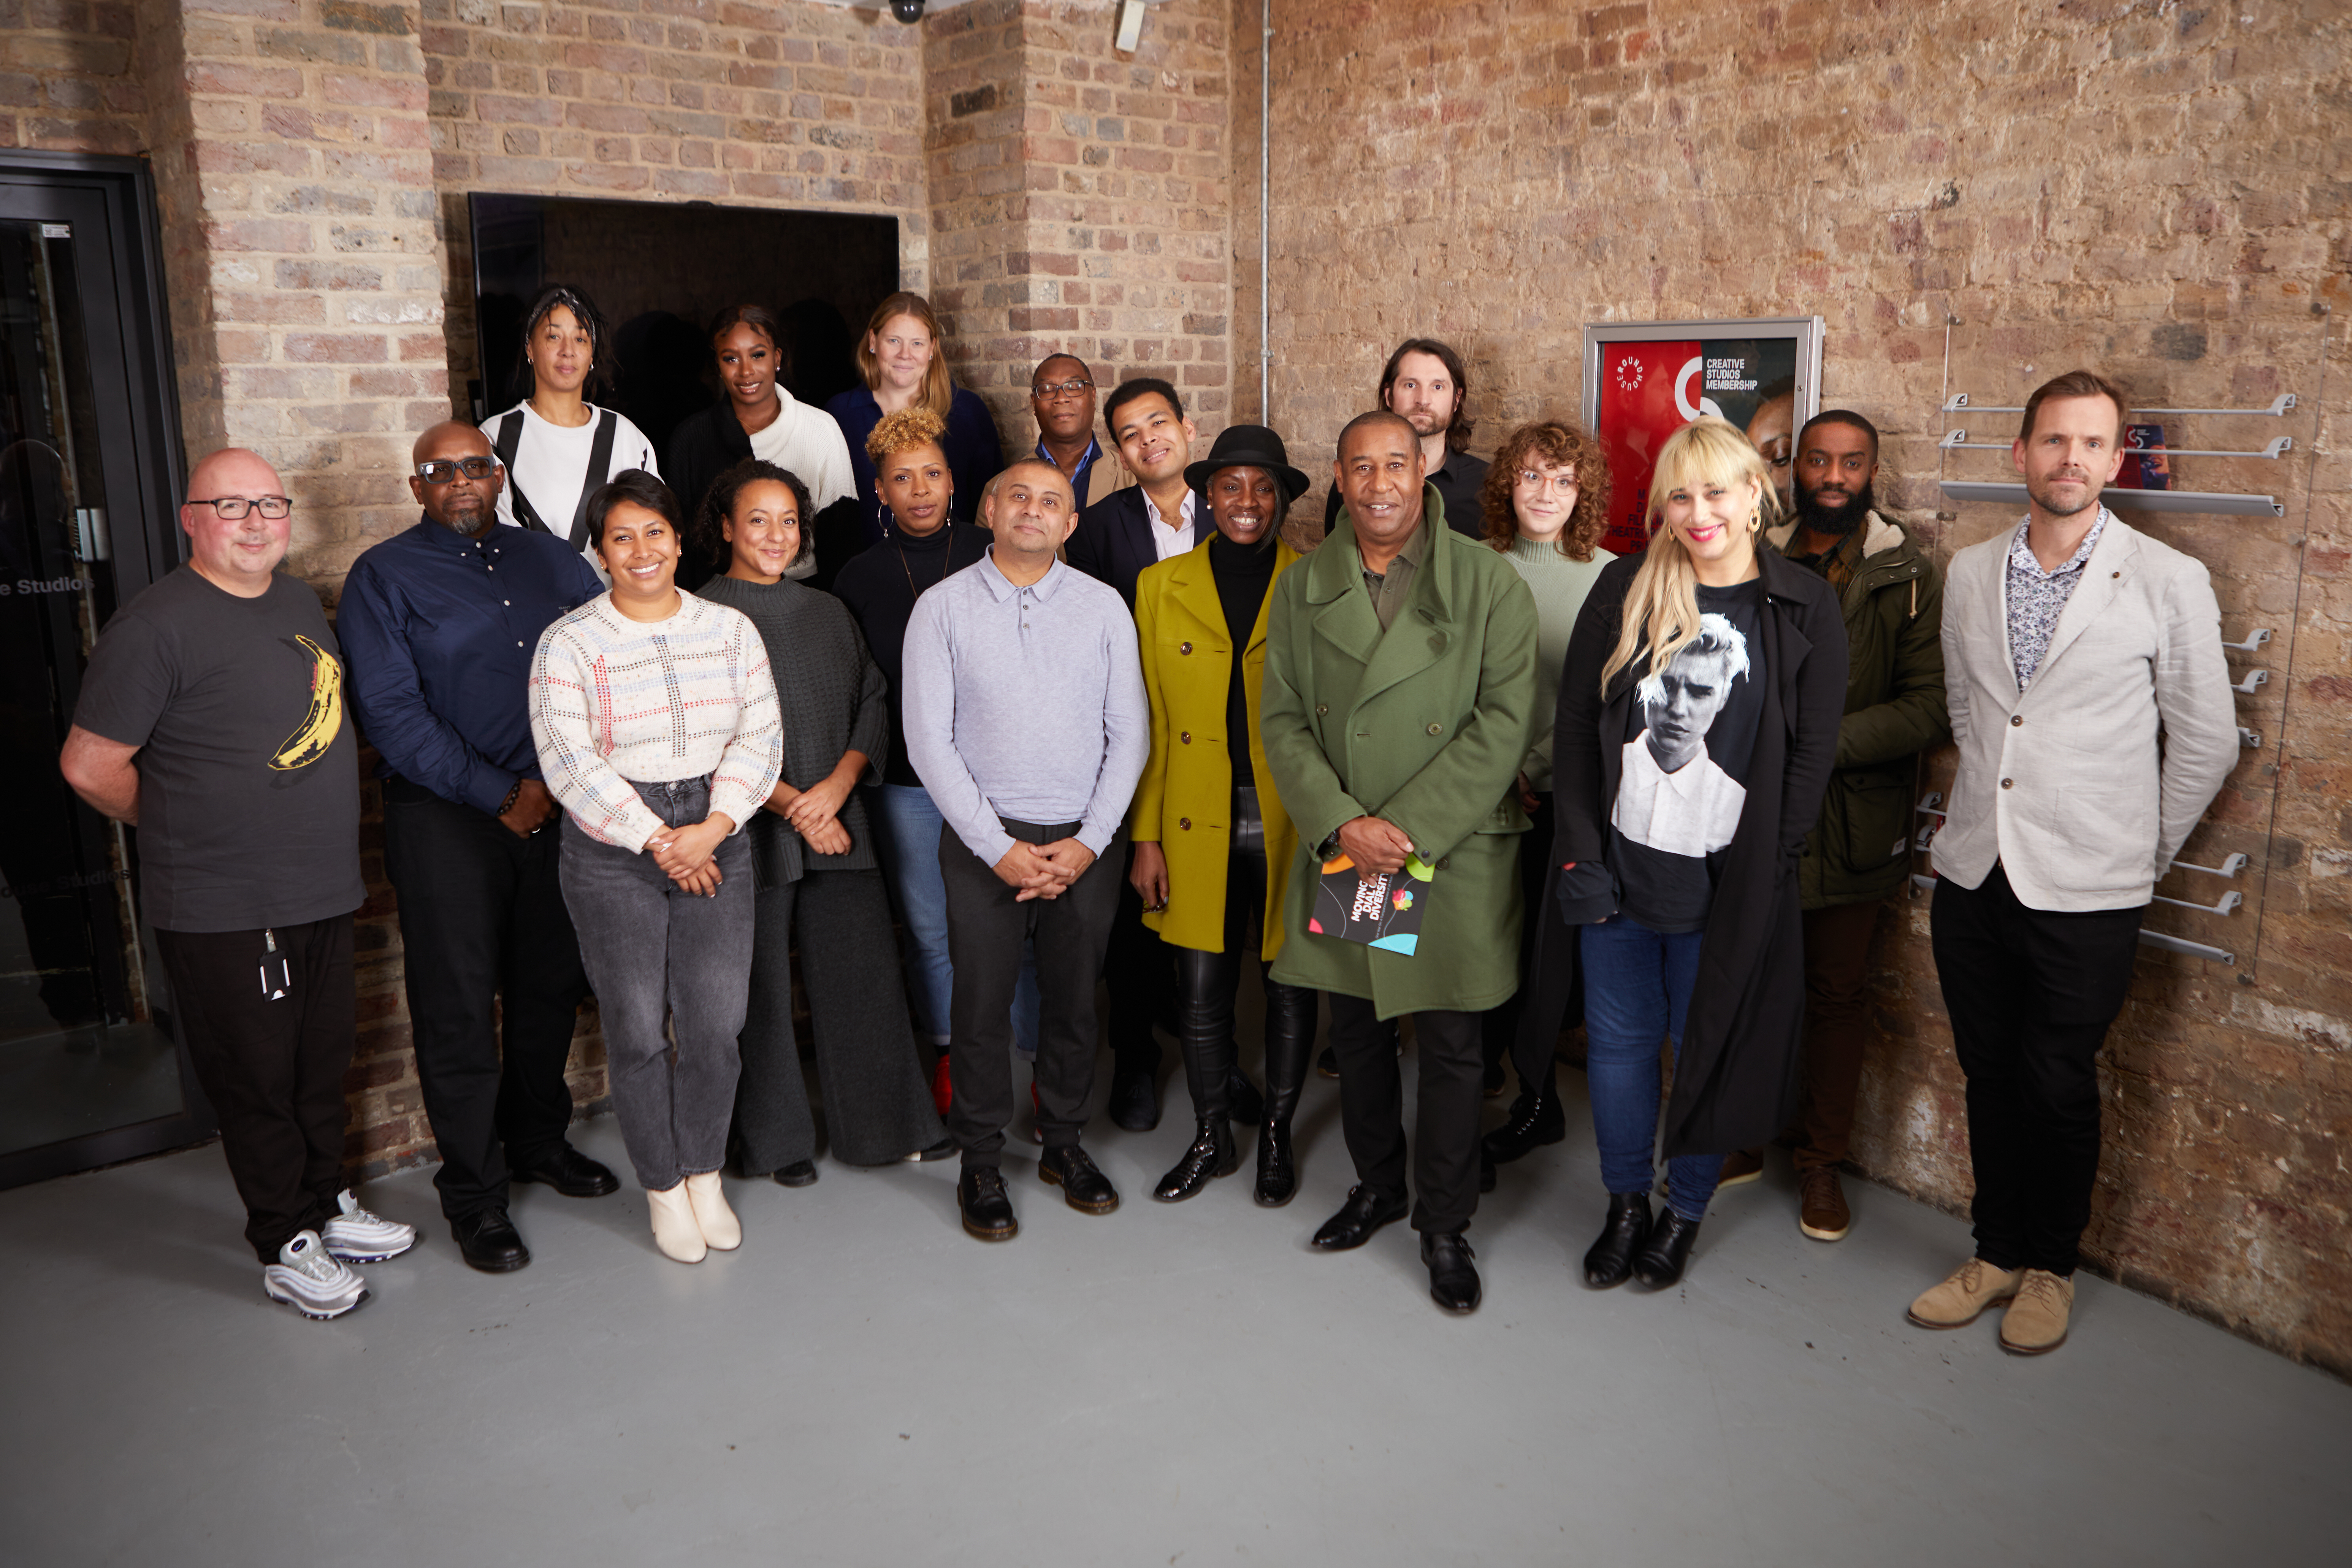 UK Music's Diversity Working Group reunited in a group photo